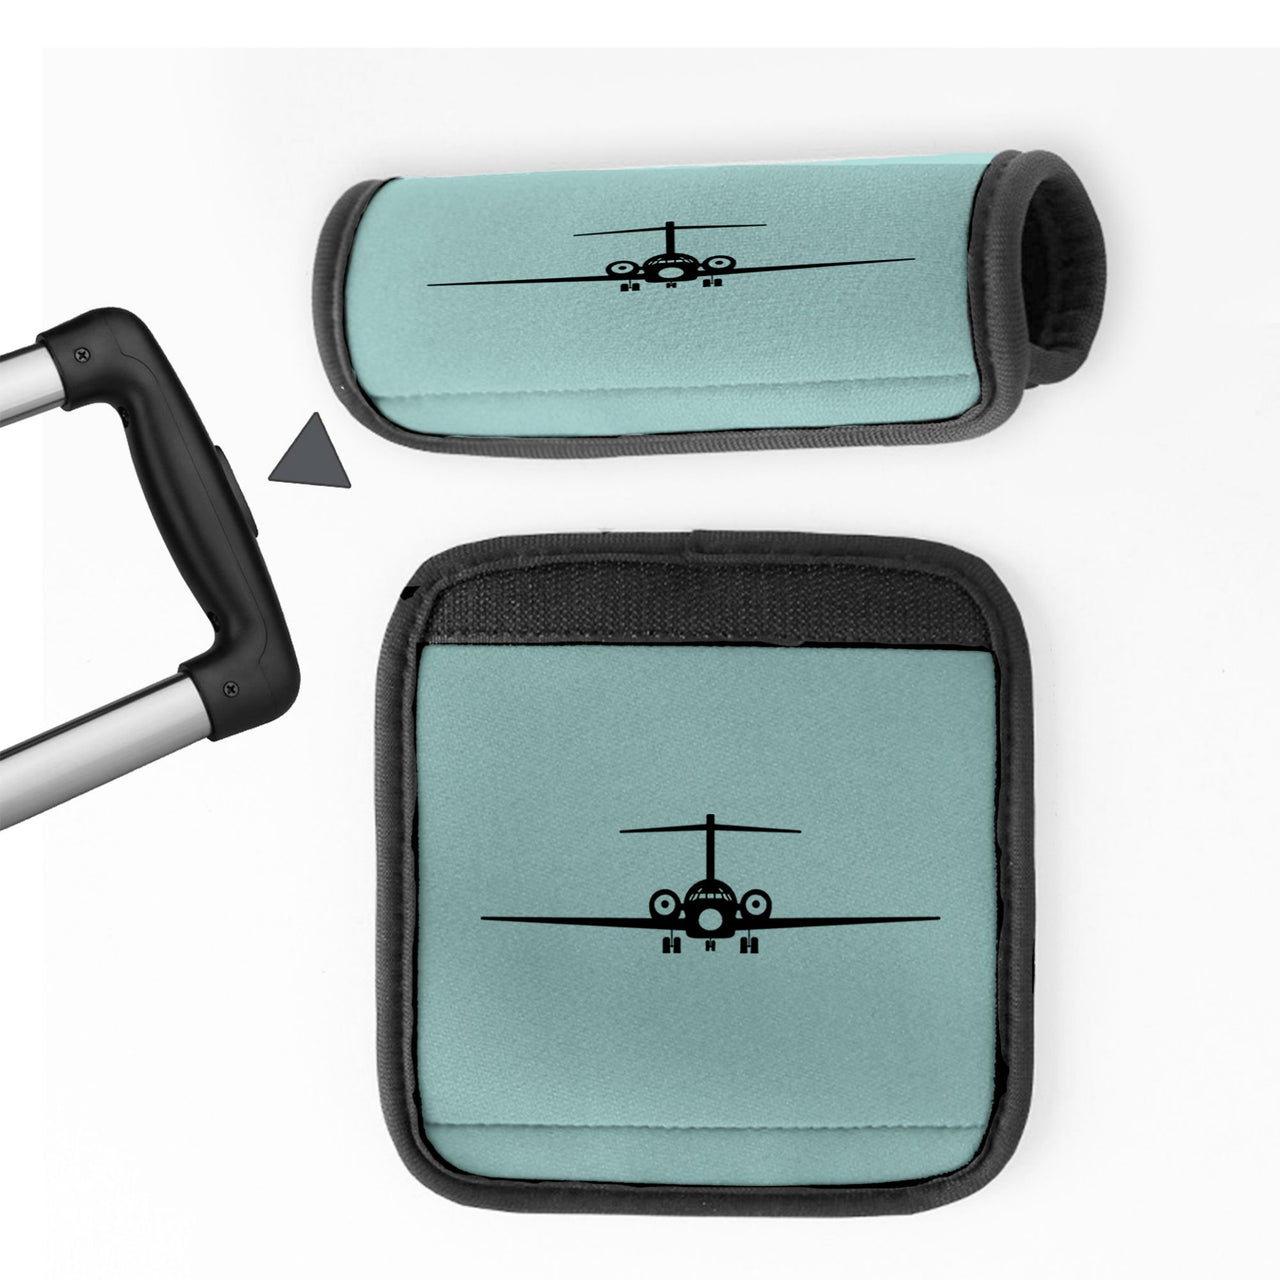 Boeing 717 Silhouette Designed Neoprene Luggage Handle Covers